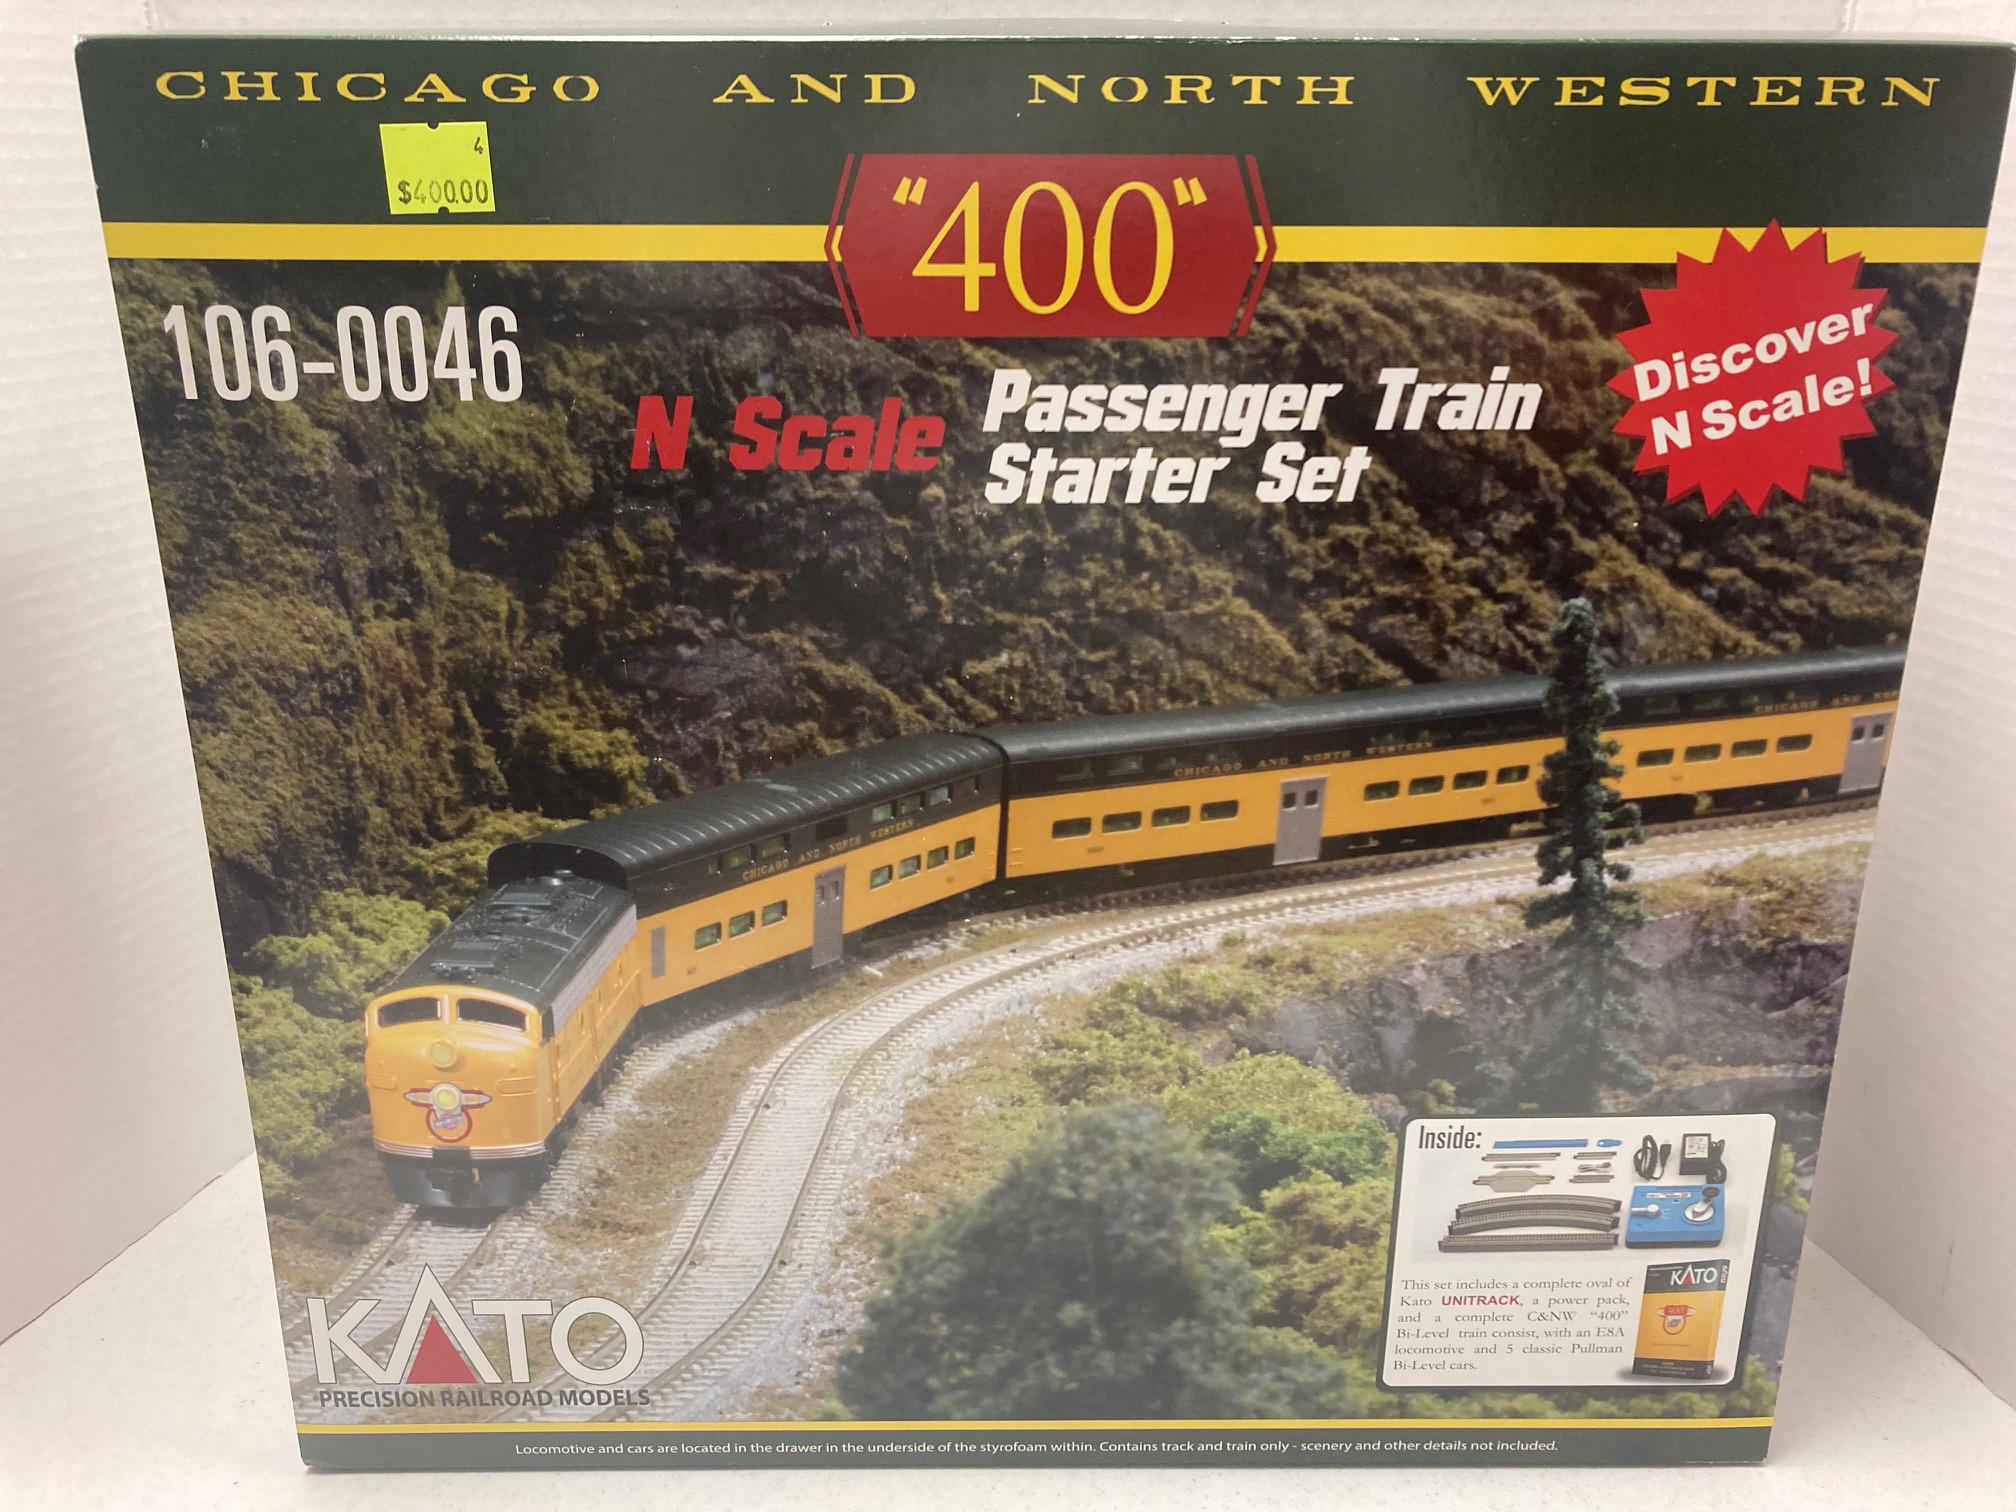 KATO Chicago And N Western "400" Classic N Scale Train Starter Set